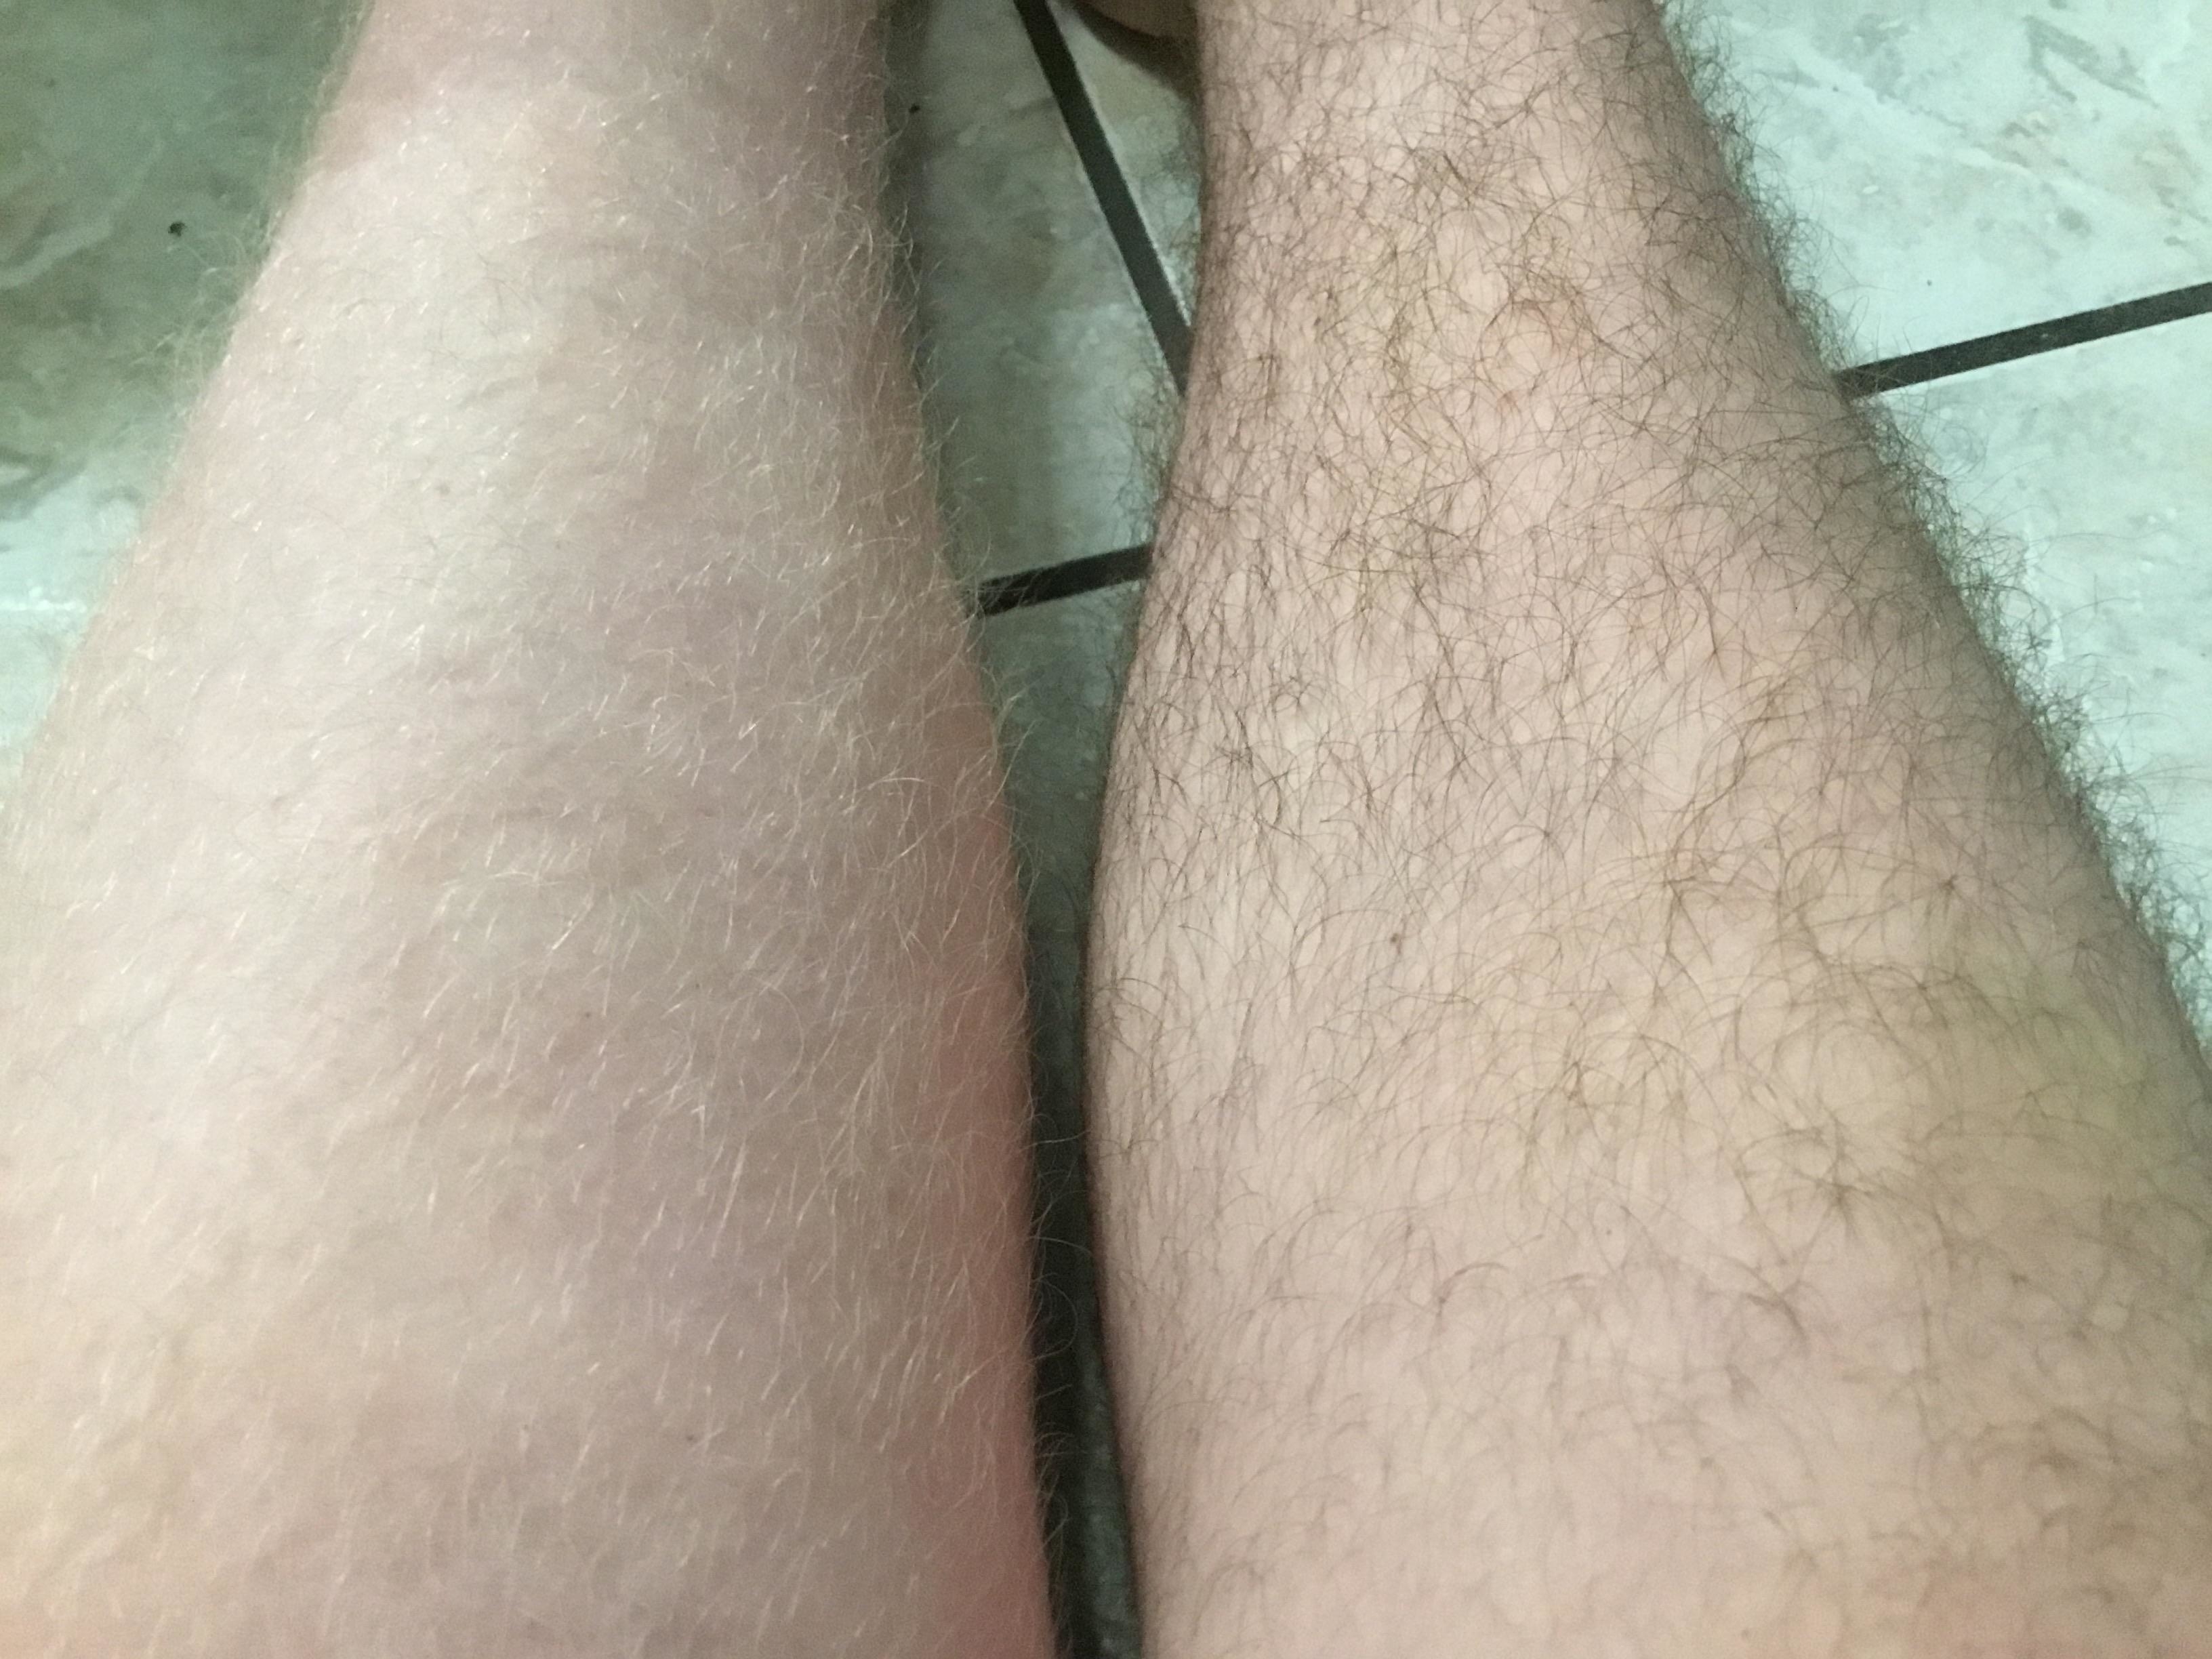 Legs with two different hair colors